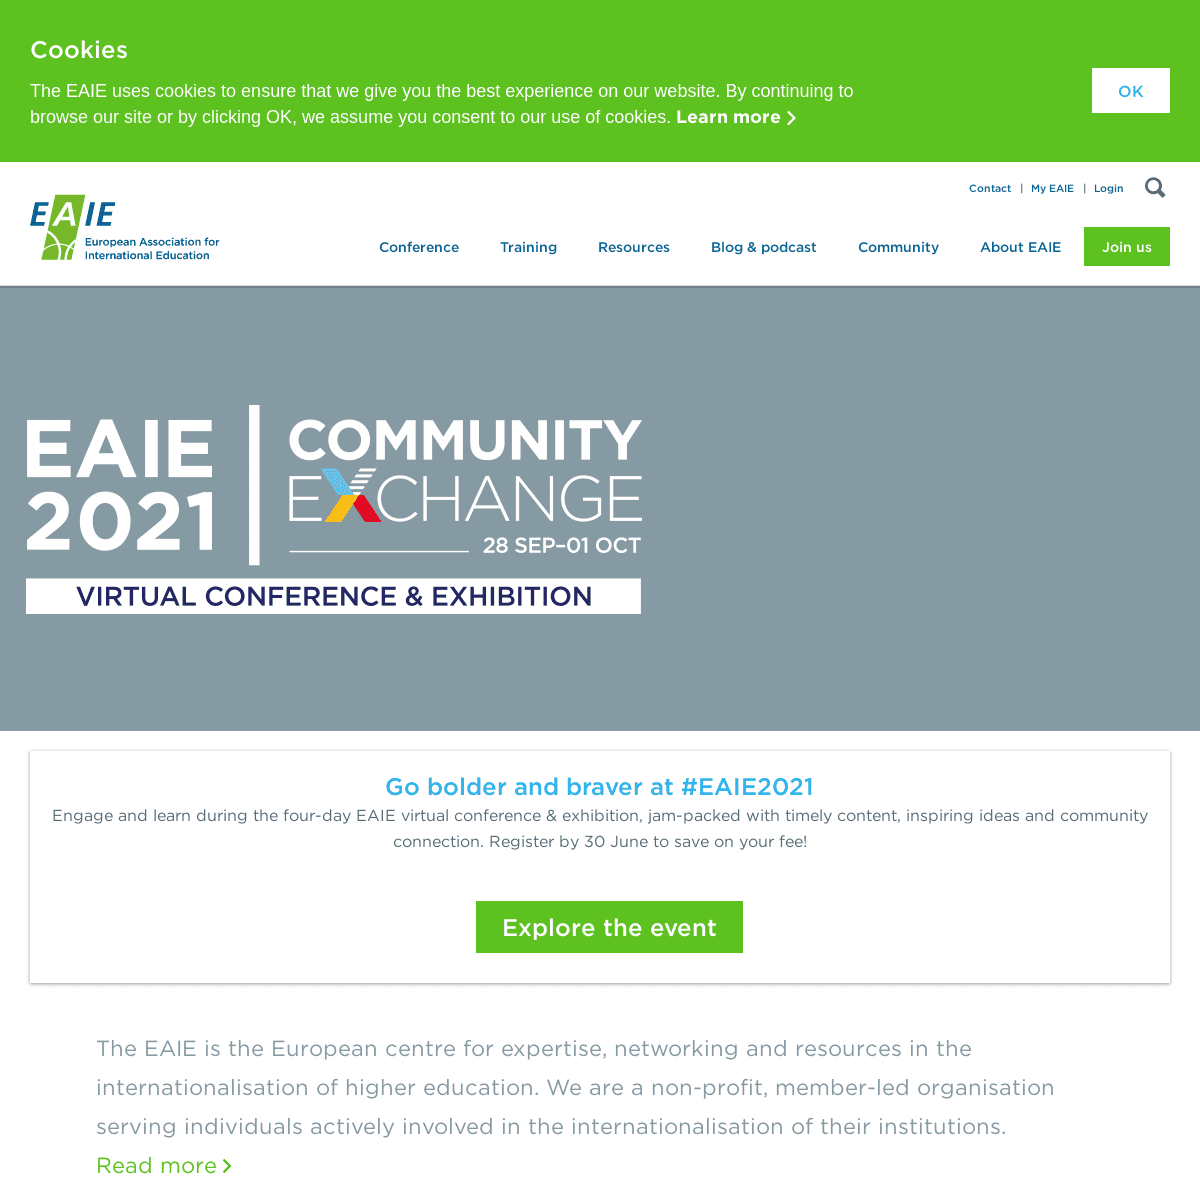 A complete backup of https://eaie.org